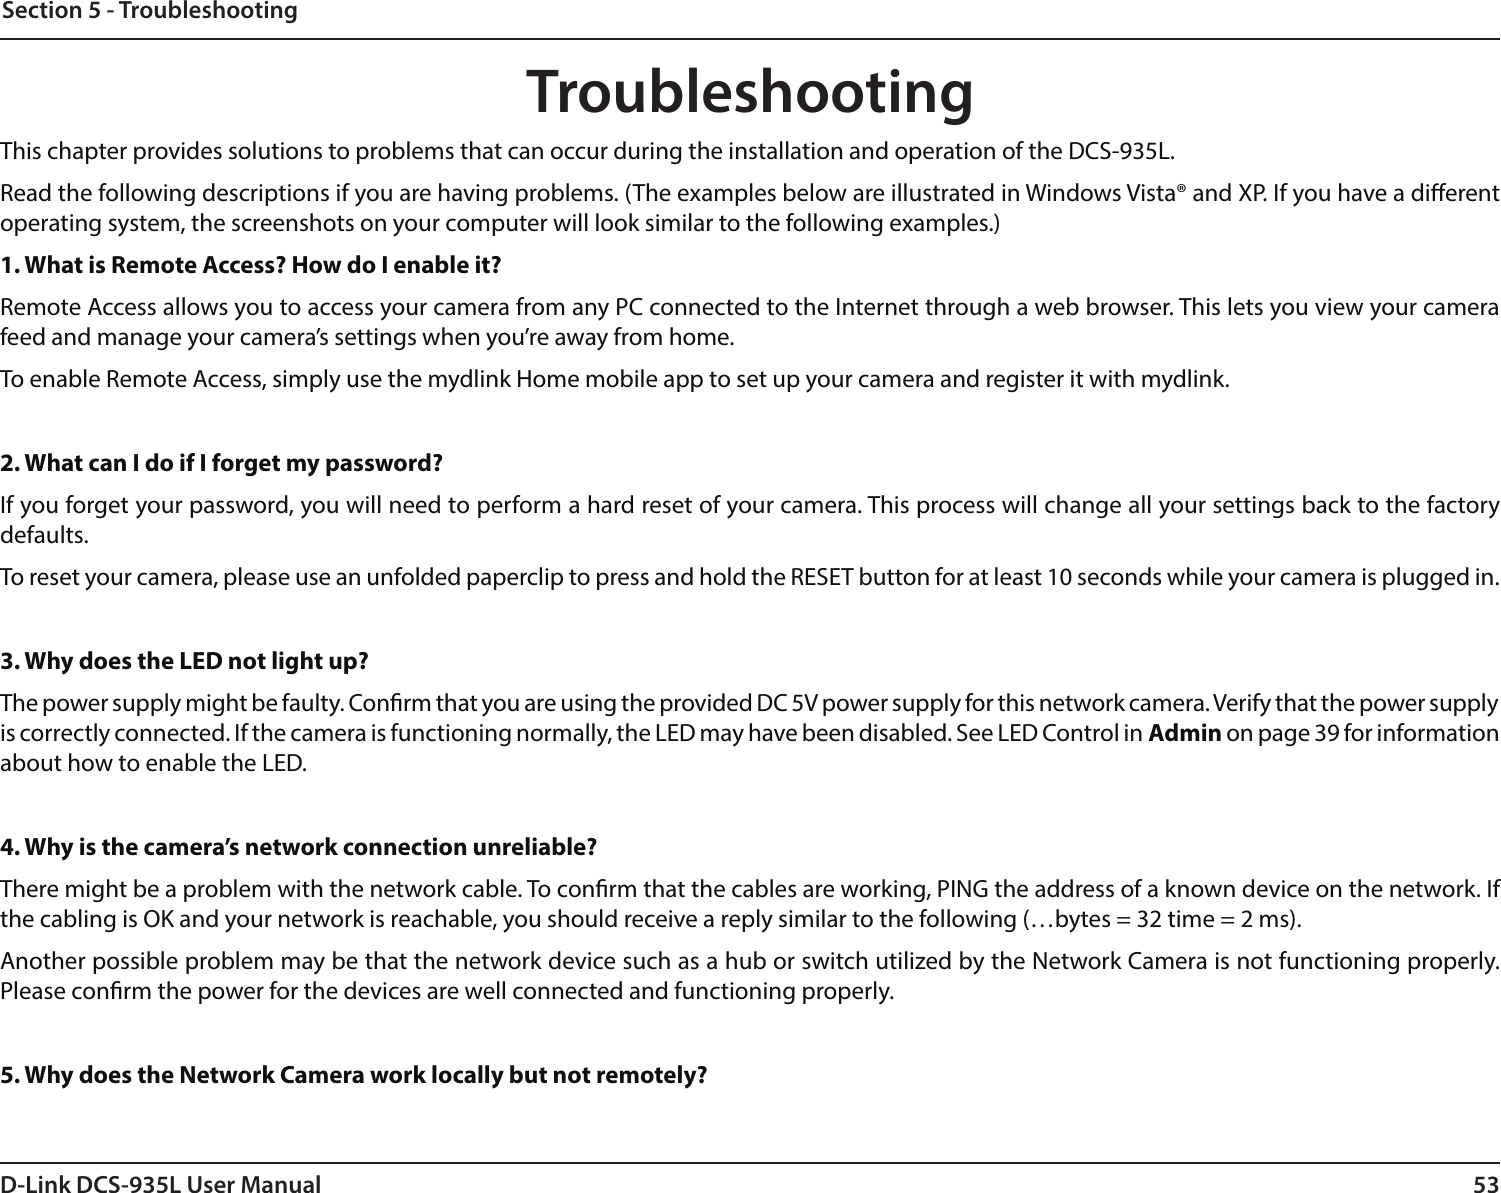 53D-Link DCS-935L User ManualSection 5 - TroubleshootingTroubleshootingThis chapter provides solutions to problems that can occur during the installation and operation of the DCS-935L.Read the following descriptions if you are having problems. (The examples below are illustrated in Windows Vista® and XP. If you have a dierent operating system, the screenshots on your computer will look similar to the following examples.)1. What is Remote Access? How do I enable it?Remote Access allows you to access your camera from any PC connected to the Internet through a web browser. This lets you view your camera feed and manage your camera’s settings when you’re away from home. To enable Remote Access, simply use the mydlink Home mobile app to set up your camera and register it with mydlink.2. What can I do if I forget my password?If you forget your password, you will need to perform a hard reset of your camera. This process will change all your settings back to the factory defaults.To reset your camera, please use an unfolded paperclip to press and hold the RESET button for at least 10 seconds while your camera is plugged in.3. Why does the LED not light up?The power supply might be faulty. Conrm that you are using the provided DC 5V power supply for this network camera. Verify that the power supply is correctly connected. If the camera is functioning normally, the LED may have been disabled. See LED Control in Admin on page 39 for information about how to enable the LED.4. Why is the camera’s network connection unreliable?There might be a problem with the network cable. To conrm that the cables are working, PING the address of a known device on the network. If the cabling is OK and your network is reachable, you should receive a reply similar to the following (…bytes = 32 time = 2 ms). Another possible problem may be that the network device such as a hub or switch utilized by the Network Camera is not functioning properly. Please conrm the power for the devices are well connected and functioning properly.5. Why does the Network Camera work locally but not remotely?